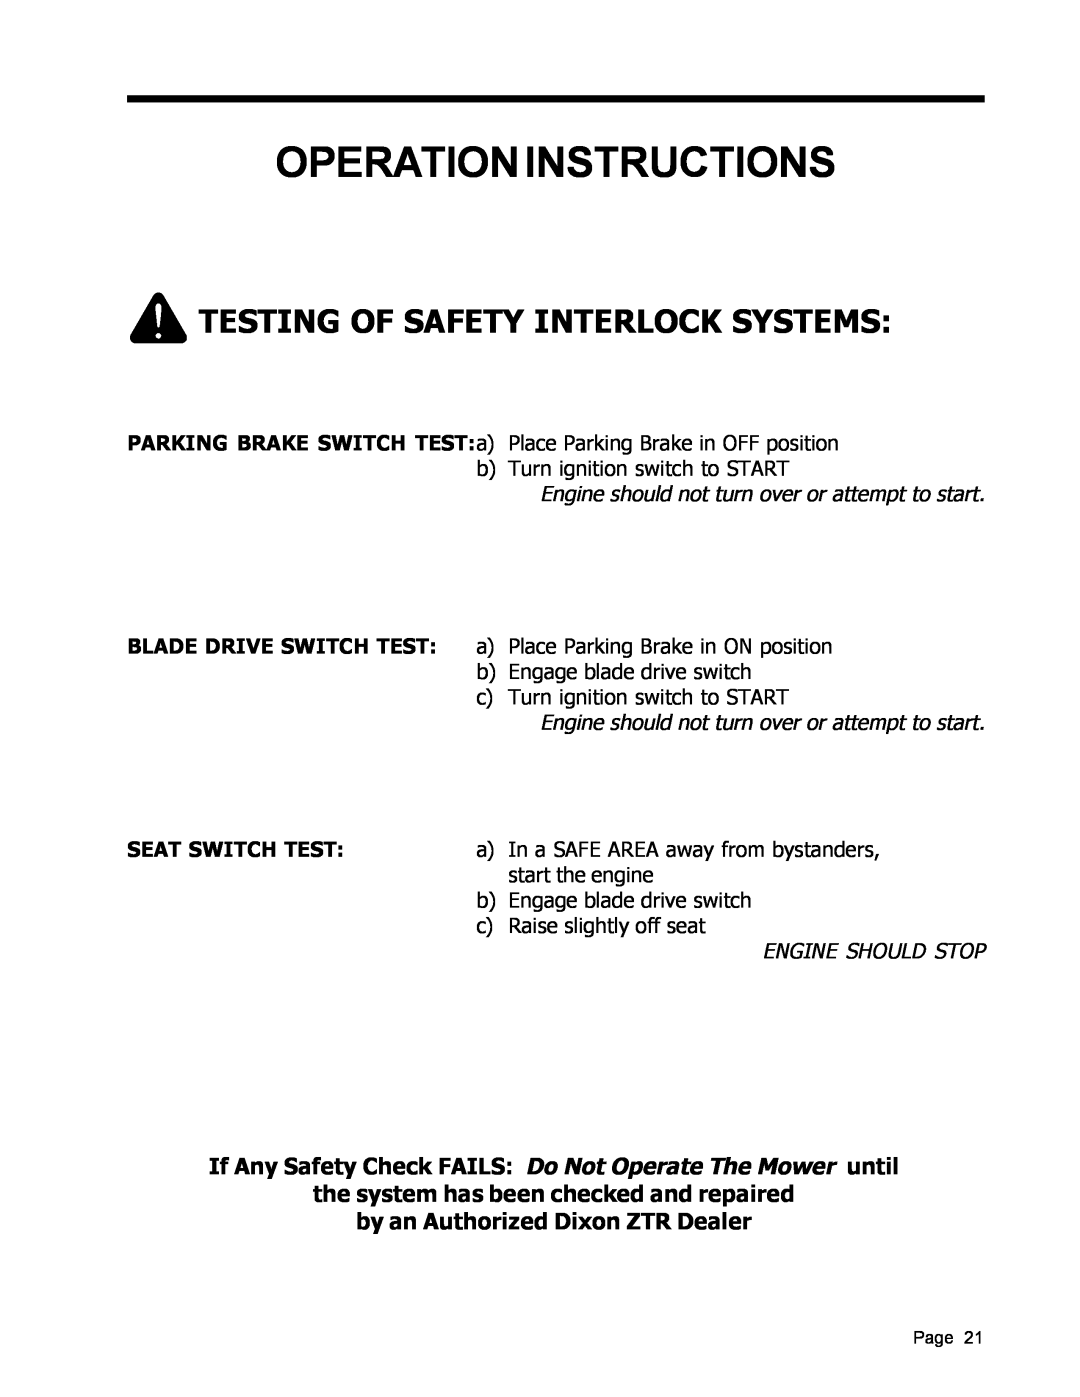 Dixon ZTR 5017 manual Testing Of Safety Interlock Systems, Operation Instructions, the system has been checked and repaired 